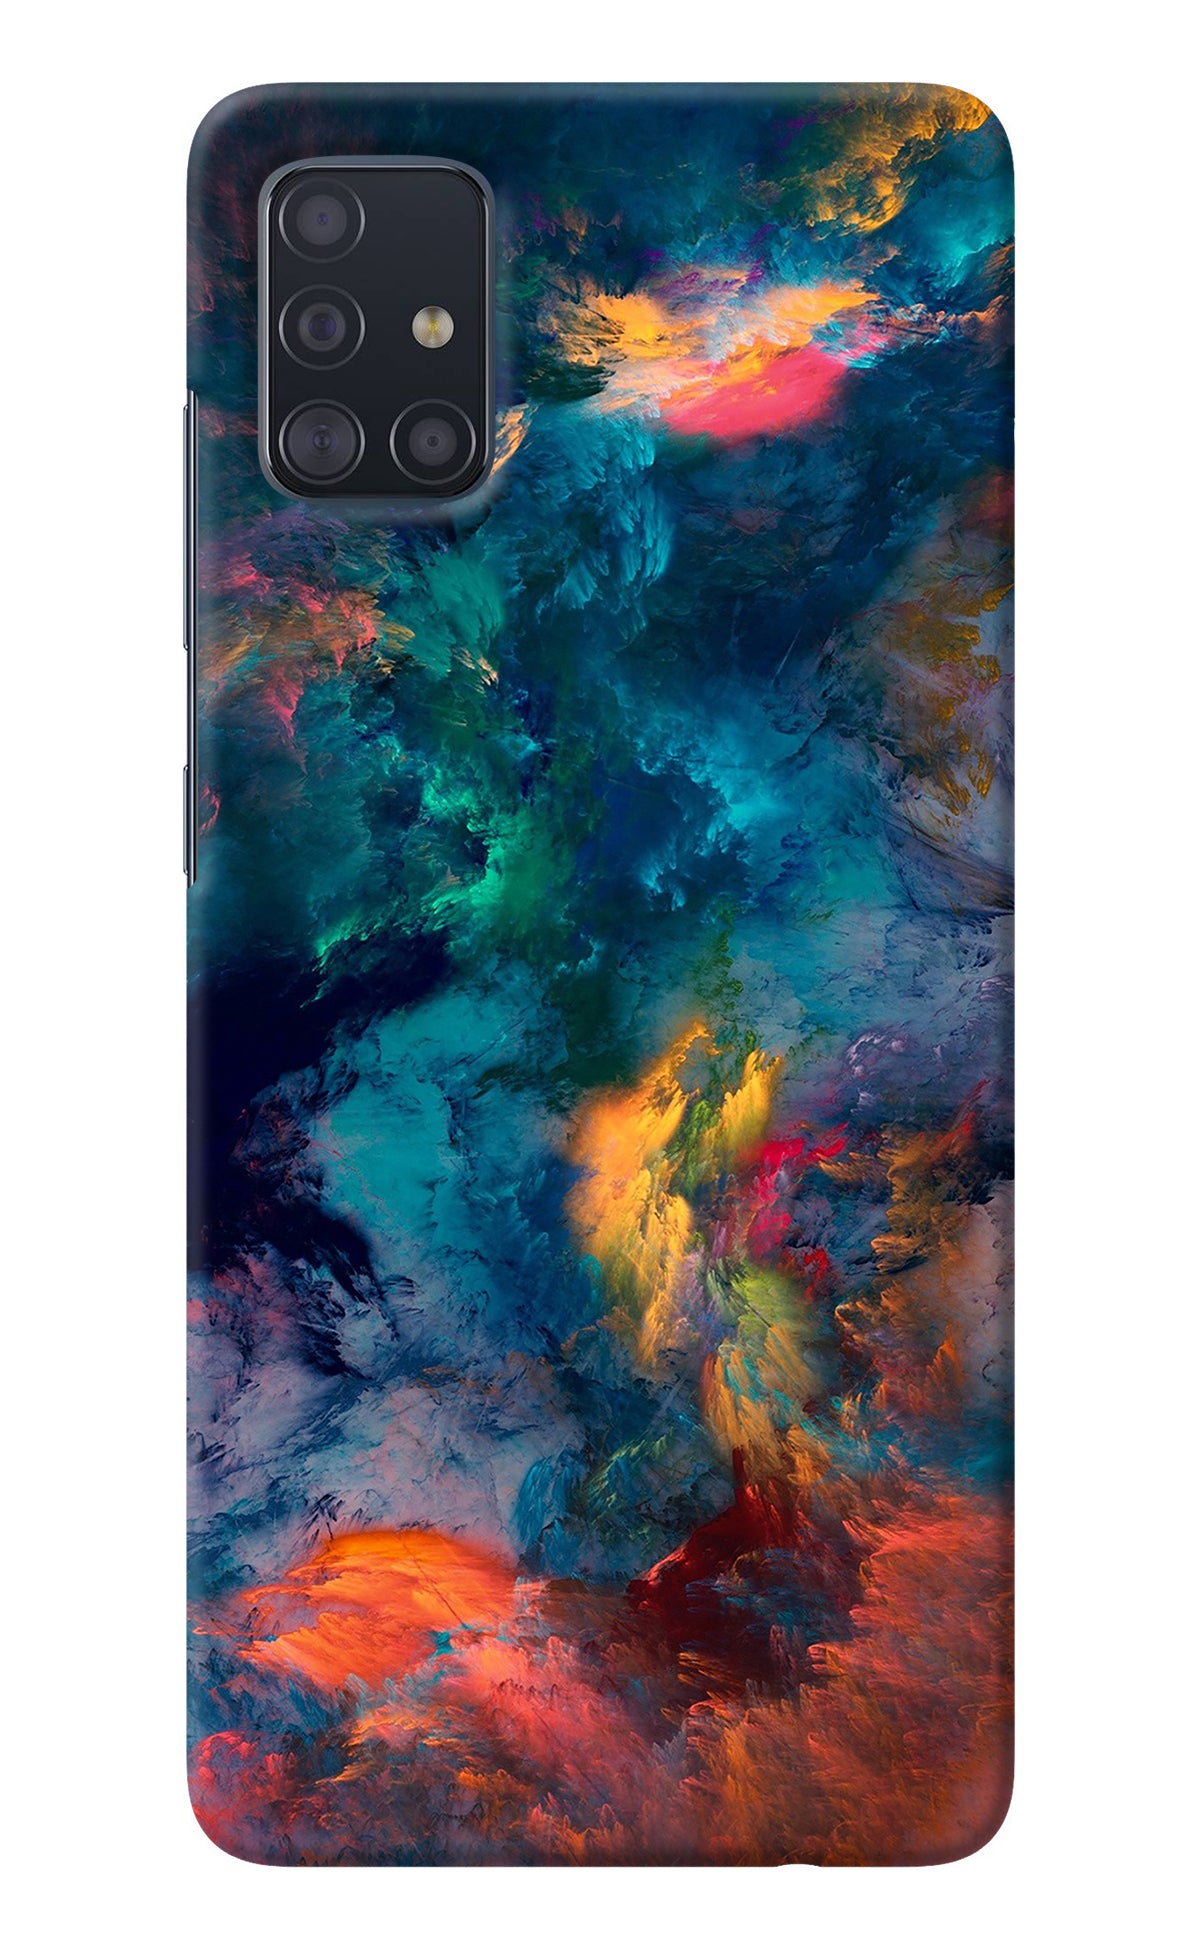 Artwork Paint Samsung A51 Back Cover